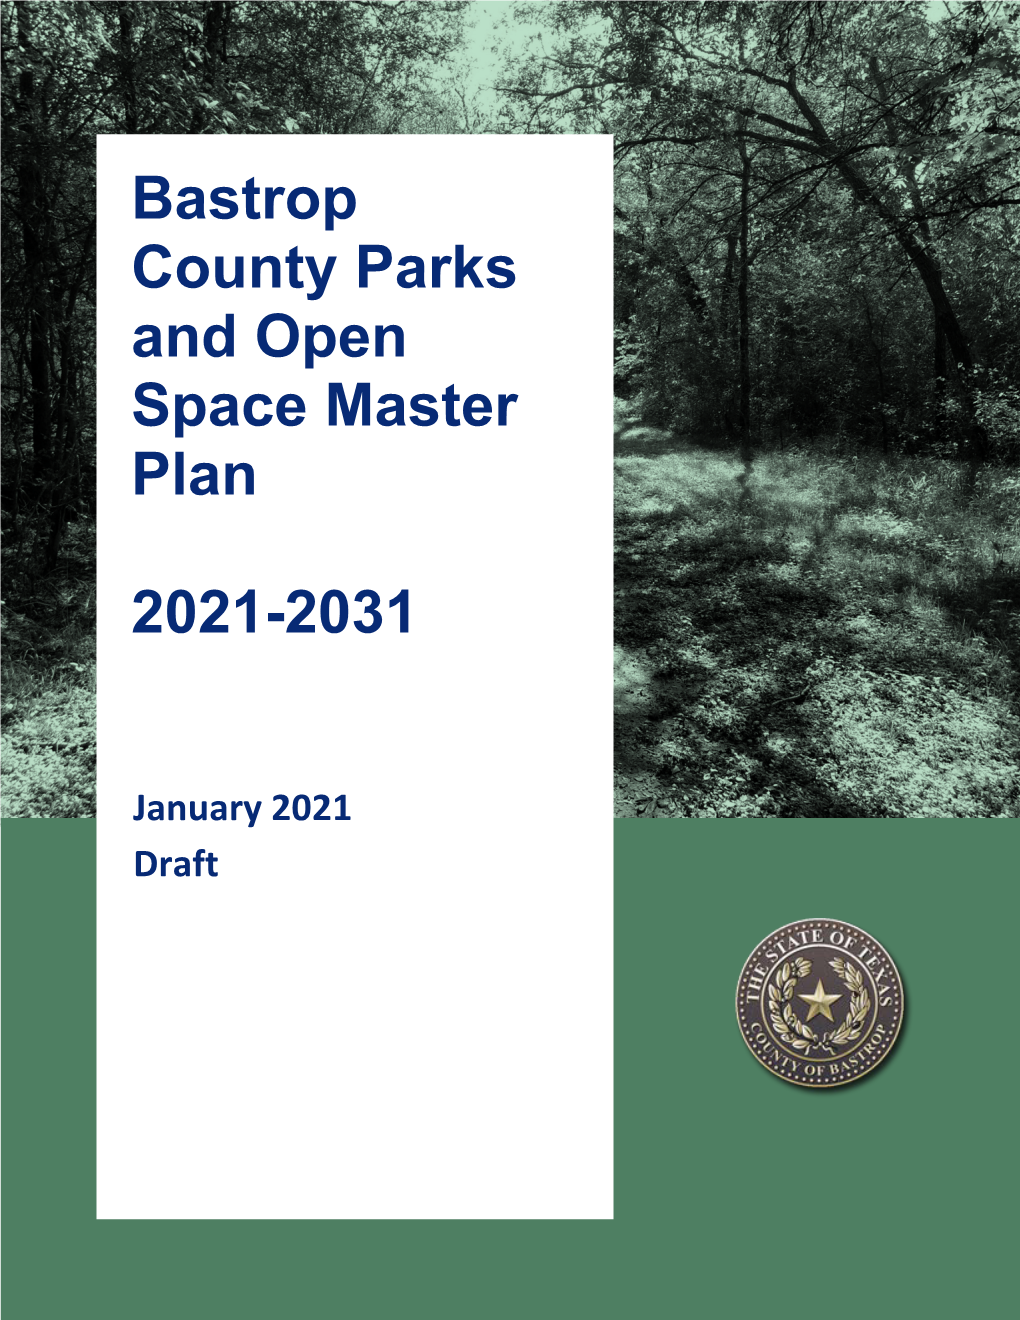 Bastrop County Parks and Open Space Master Plan 2021-2031